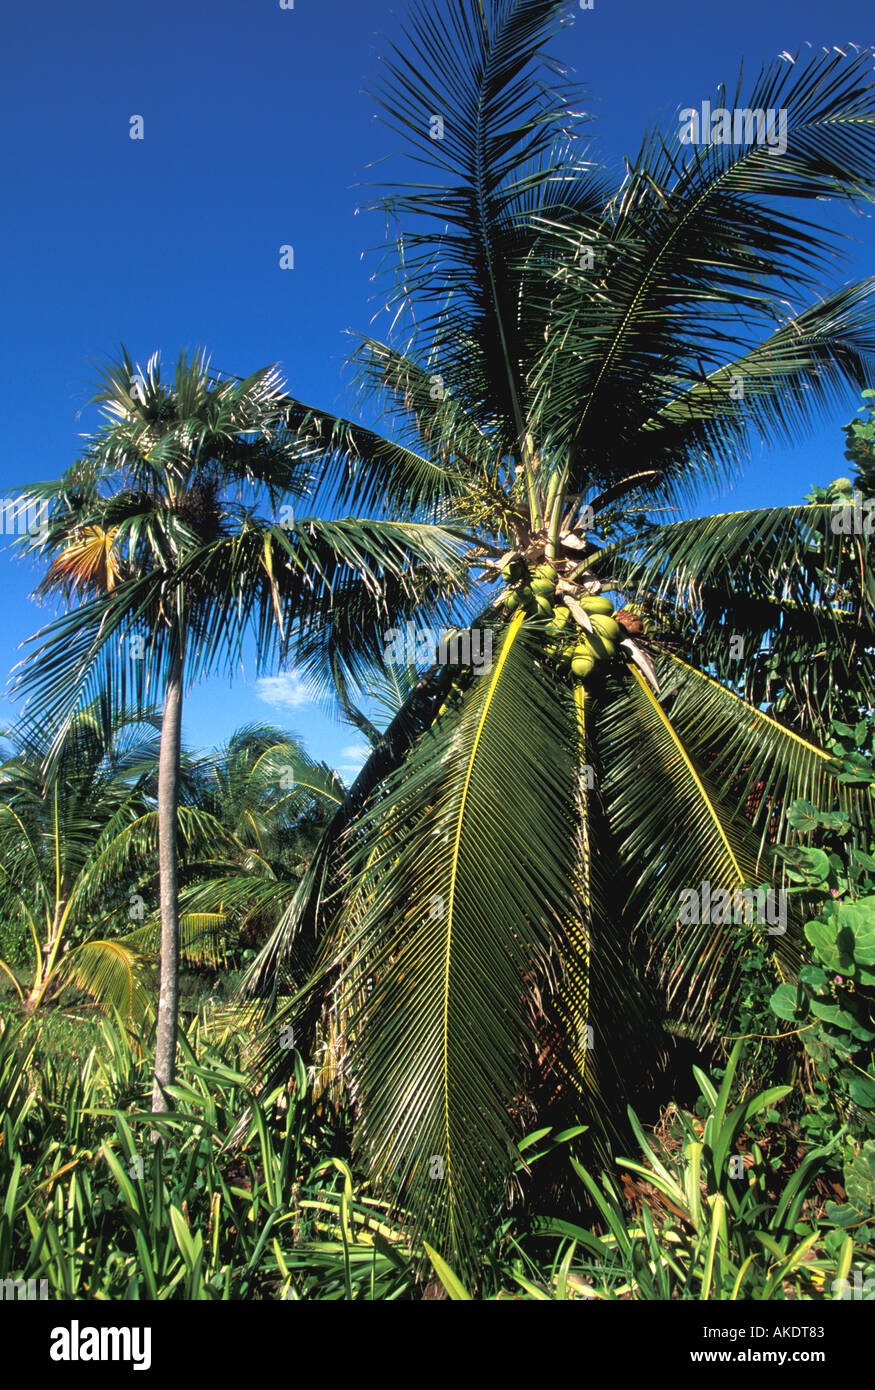 coconut palm tree oversize fronds branches against deep blue sky Stock Photo